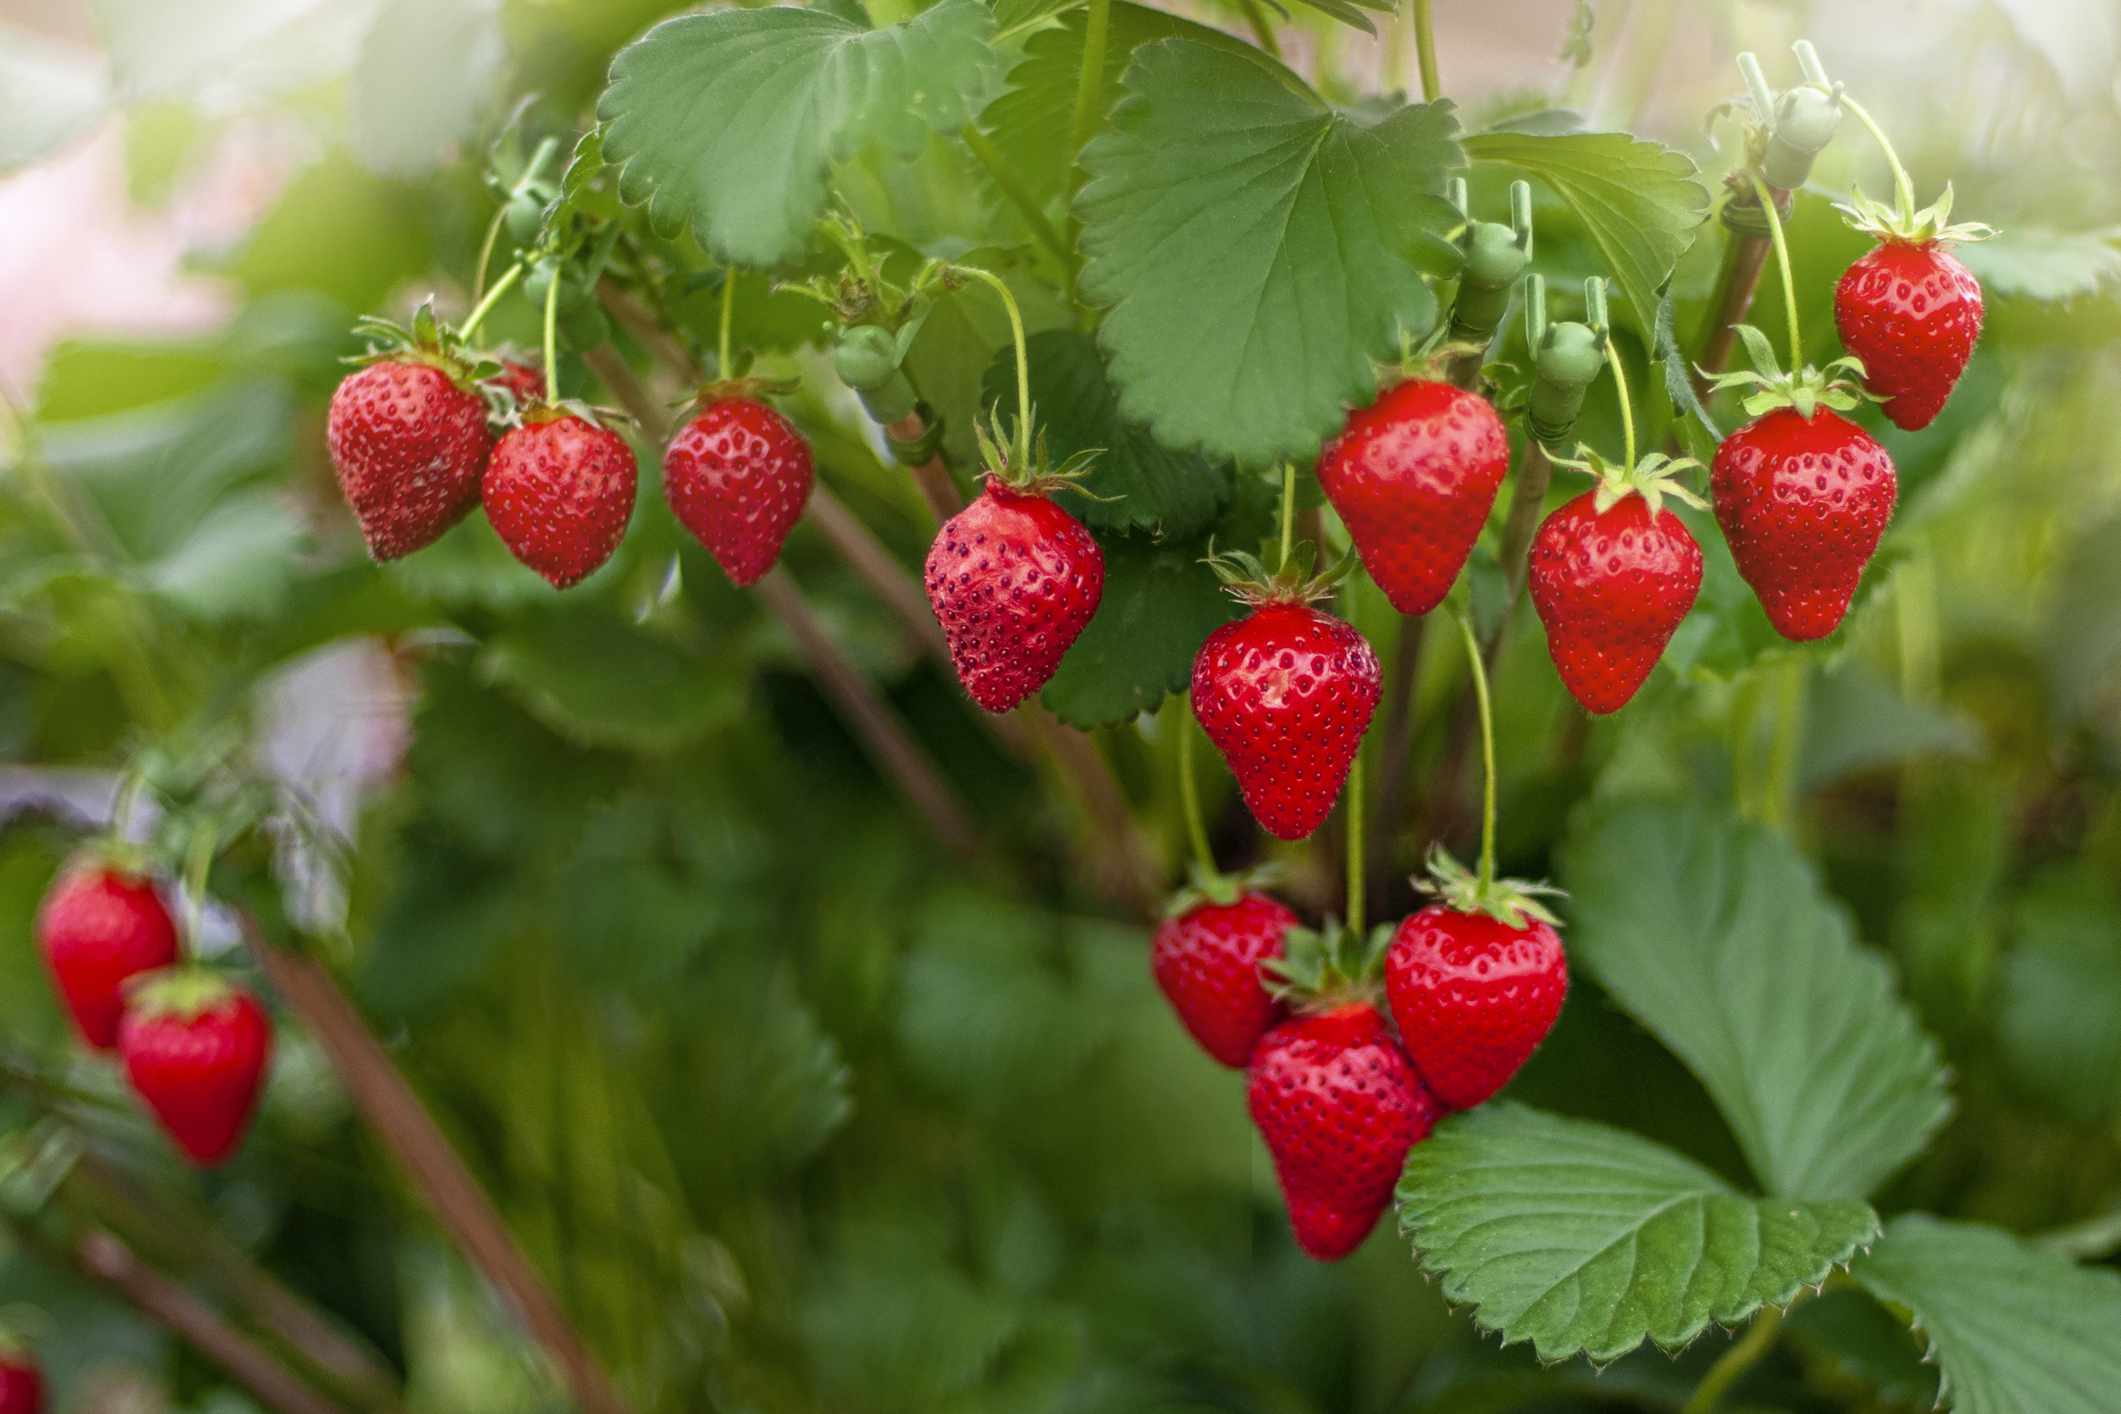 When to fertilize strawberries – expert tips to get the timing right for bigger harvests